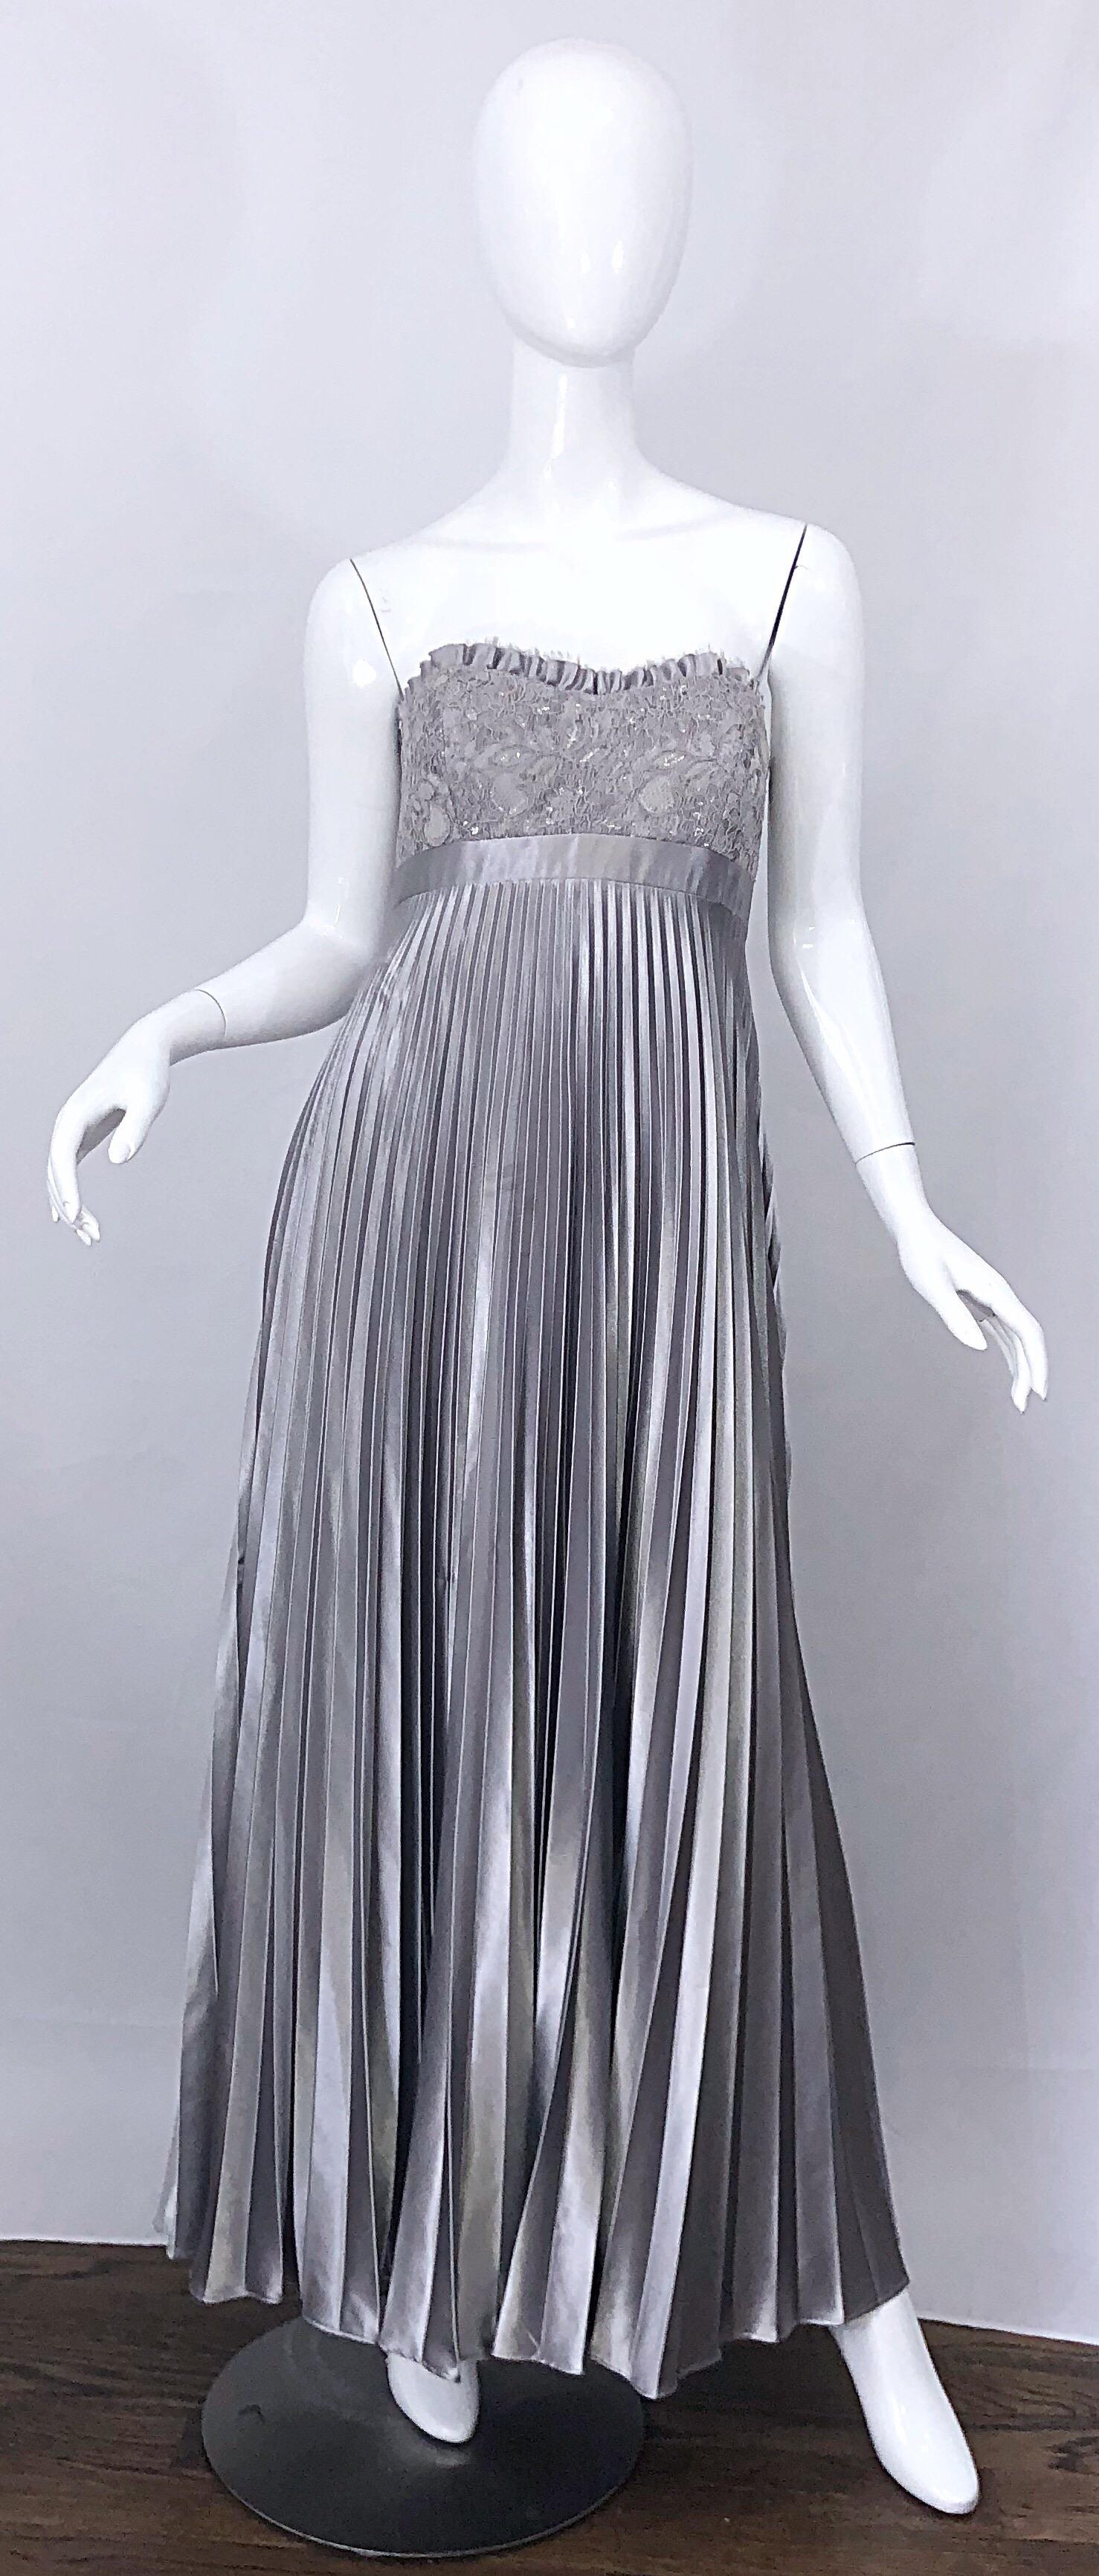 Beautiful vintage 90s BADGLEY MISCHKA Couture quality metallic silver gray strapless evening gown! Features a fitted boned lace bodice with silver sequins hand-sewn throughout. Flattering and forgiving empire waist accordian pleated skirt. Hidden